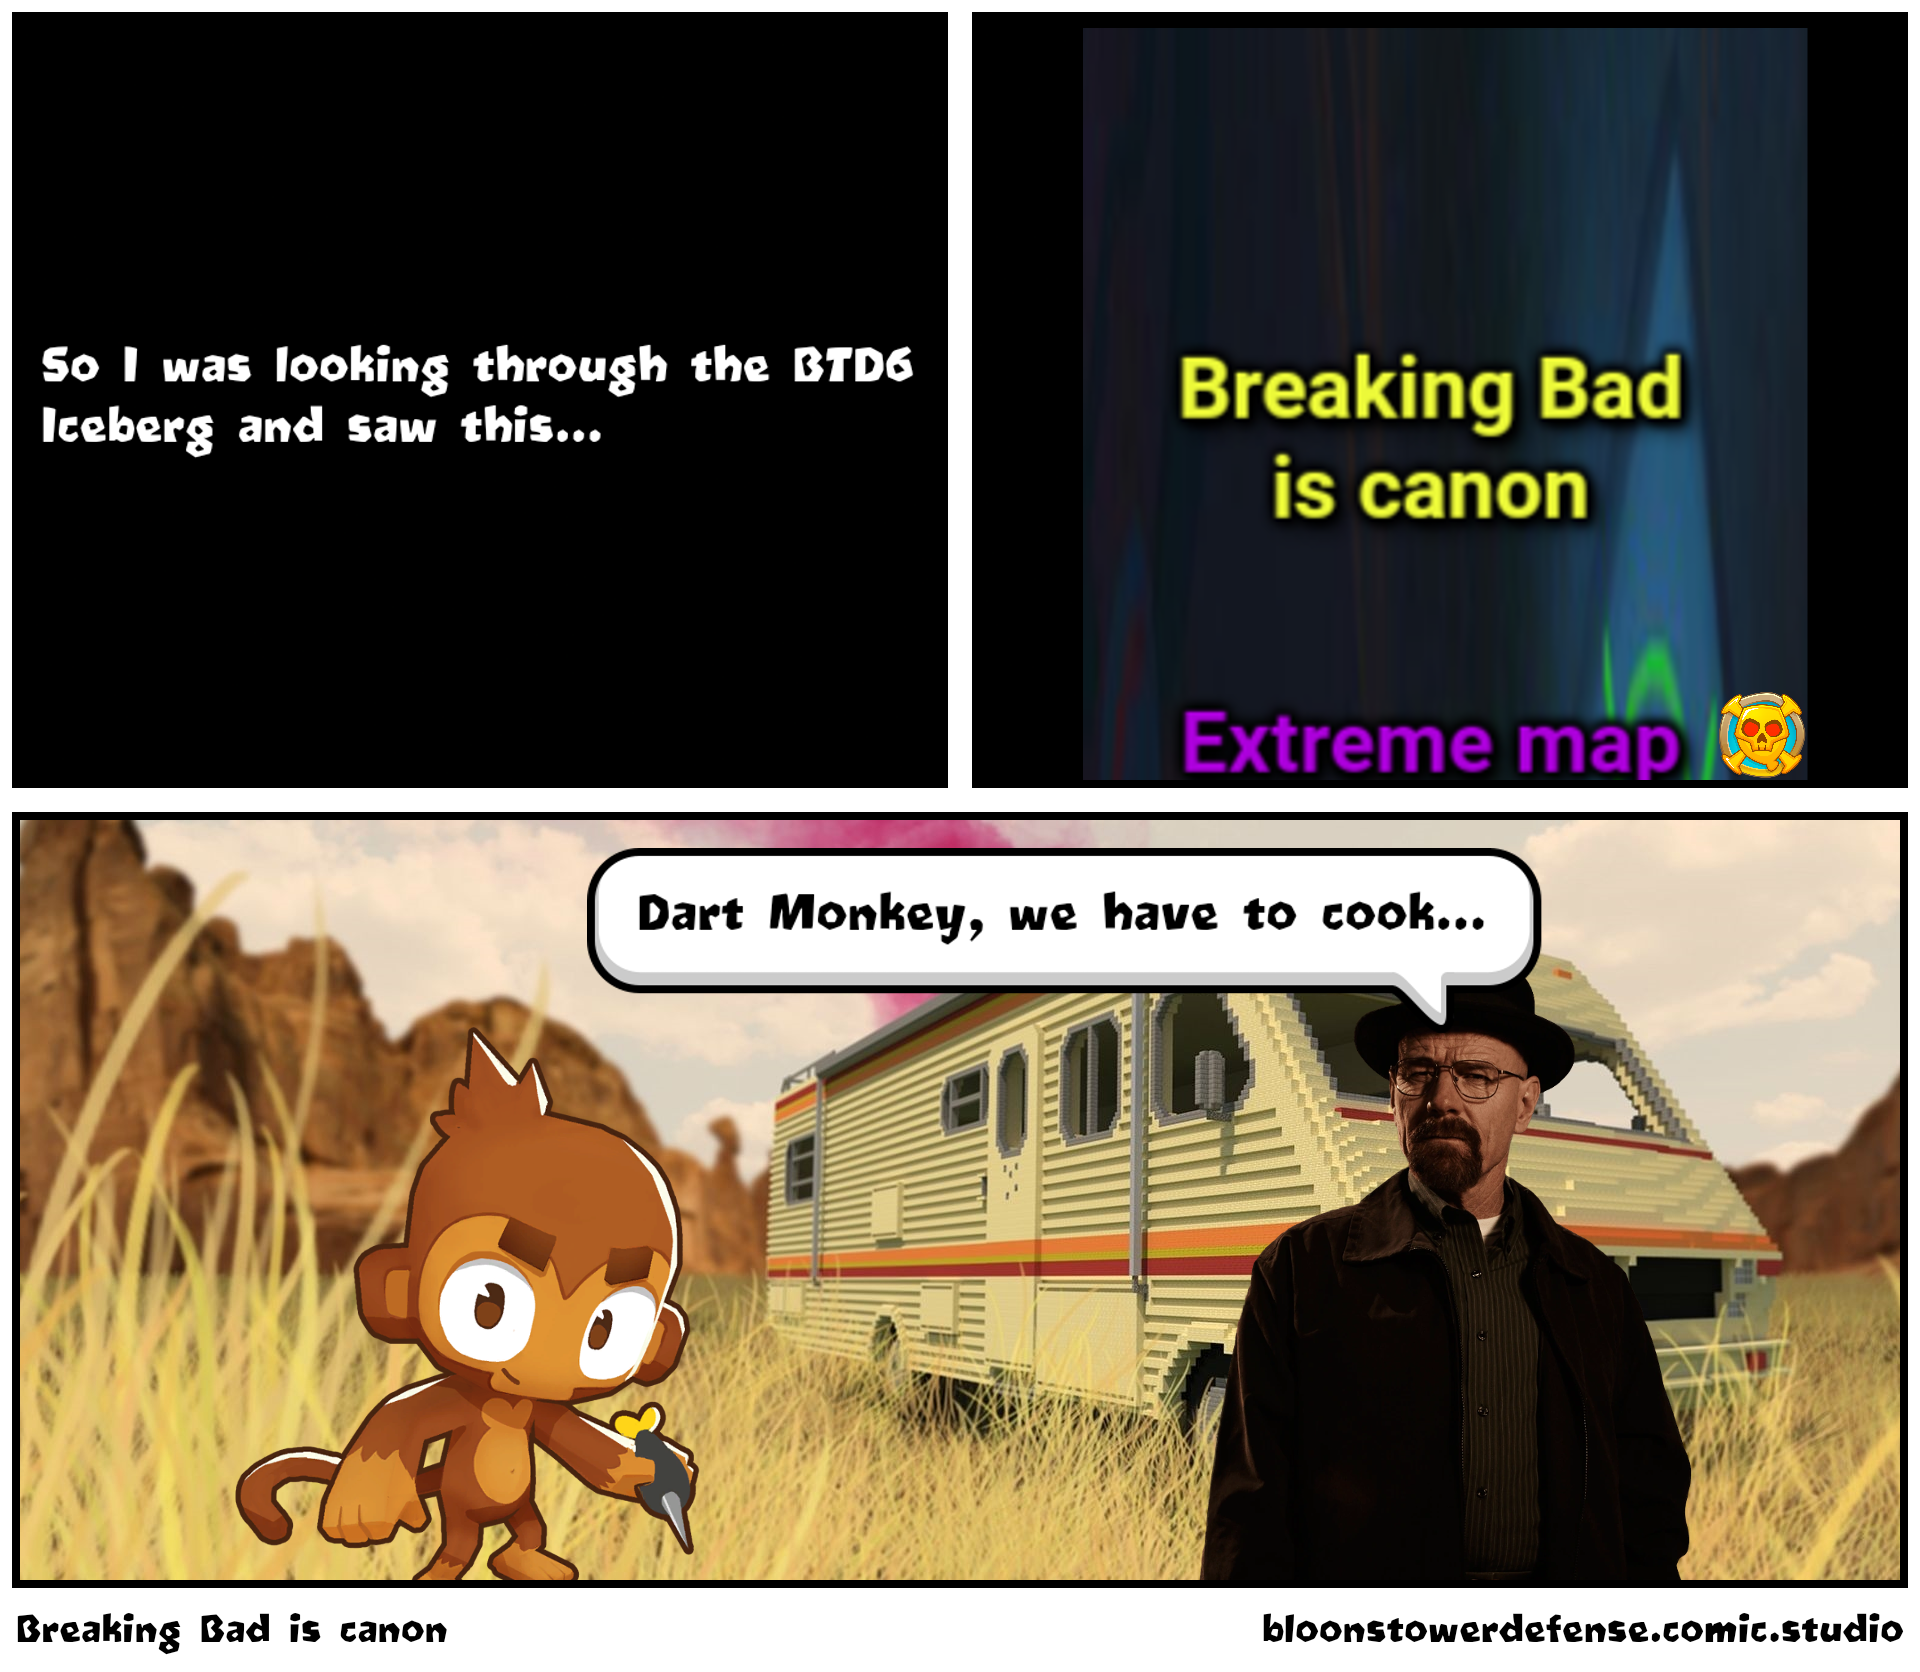 Breaking Bad is canon